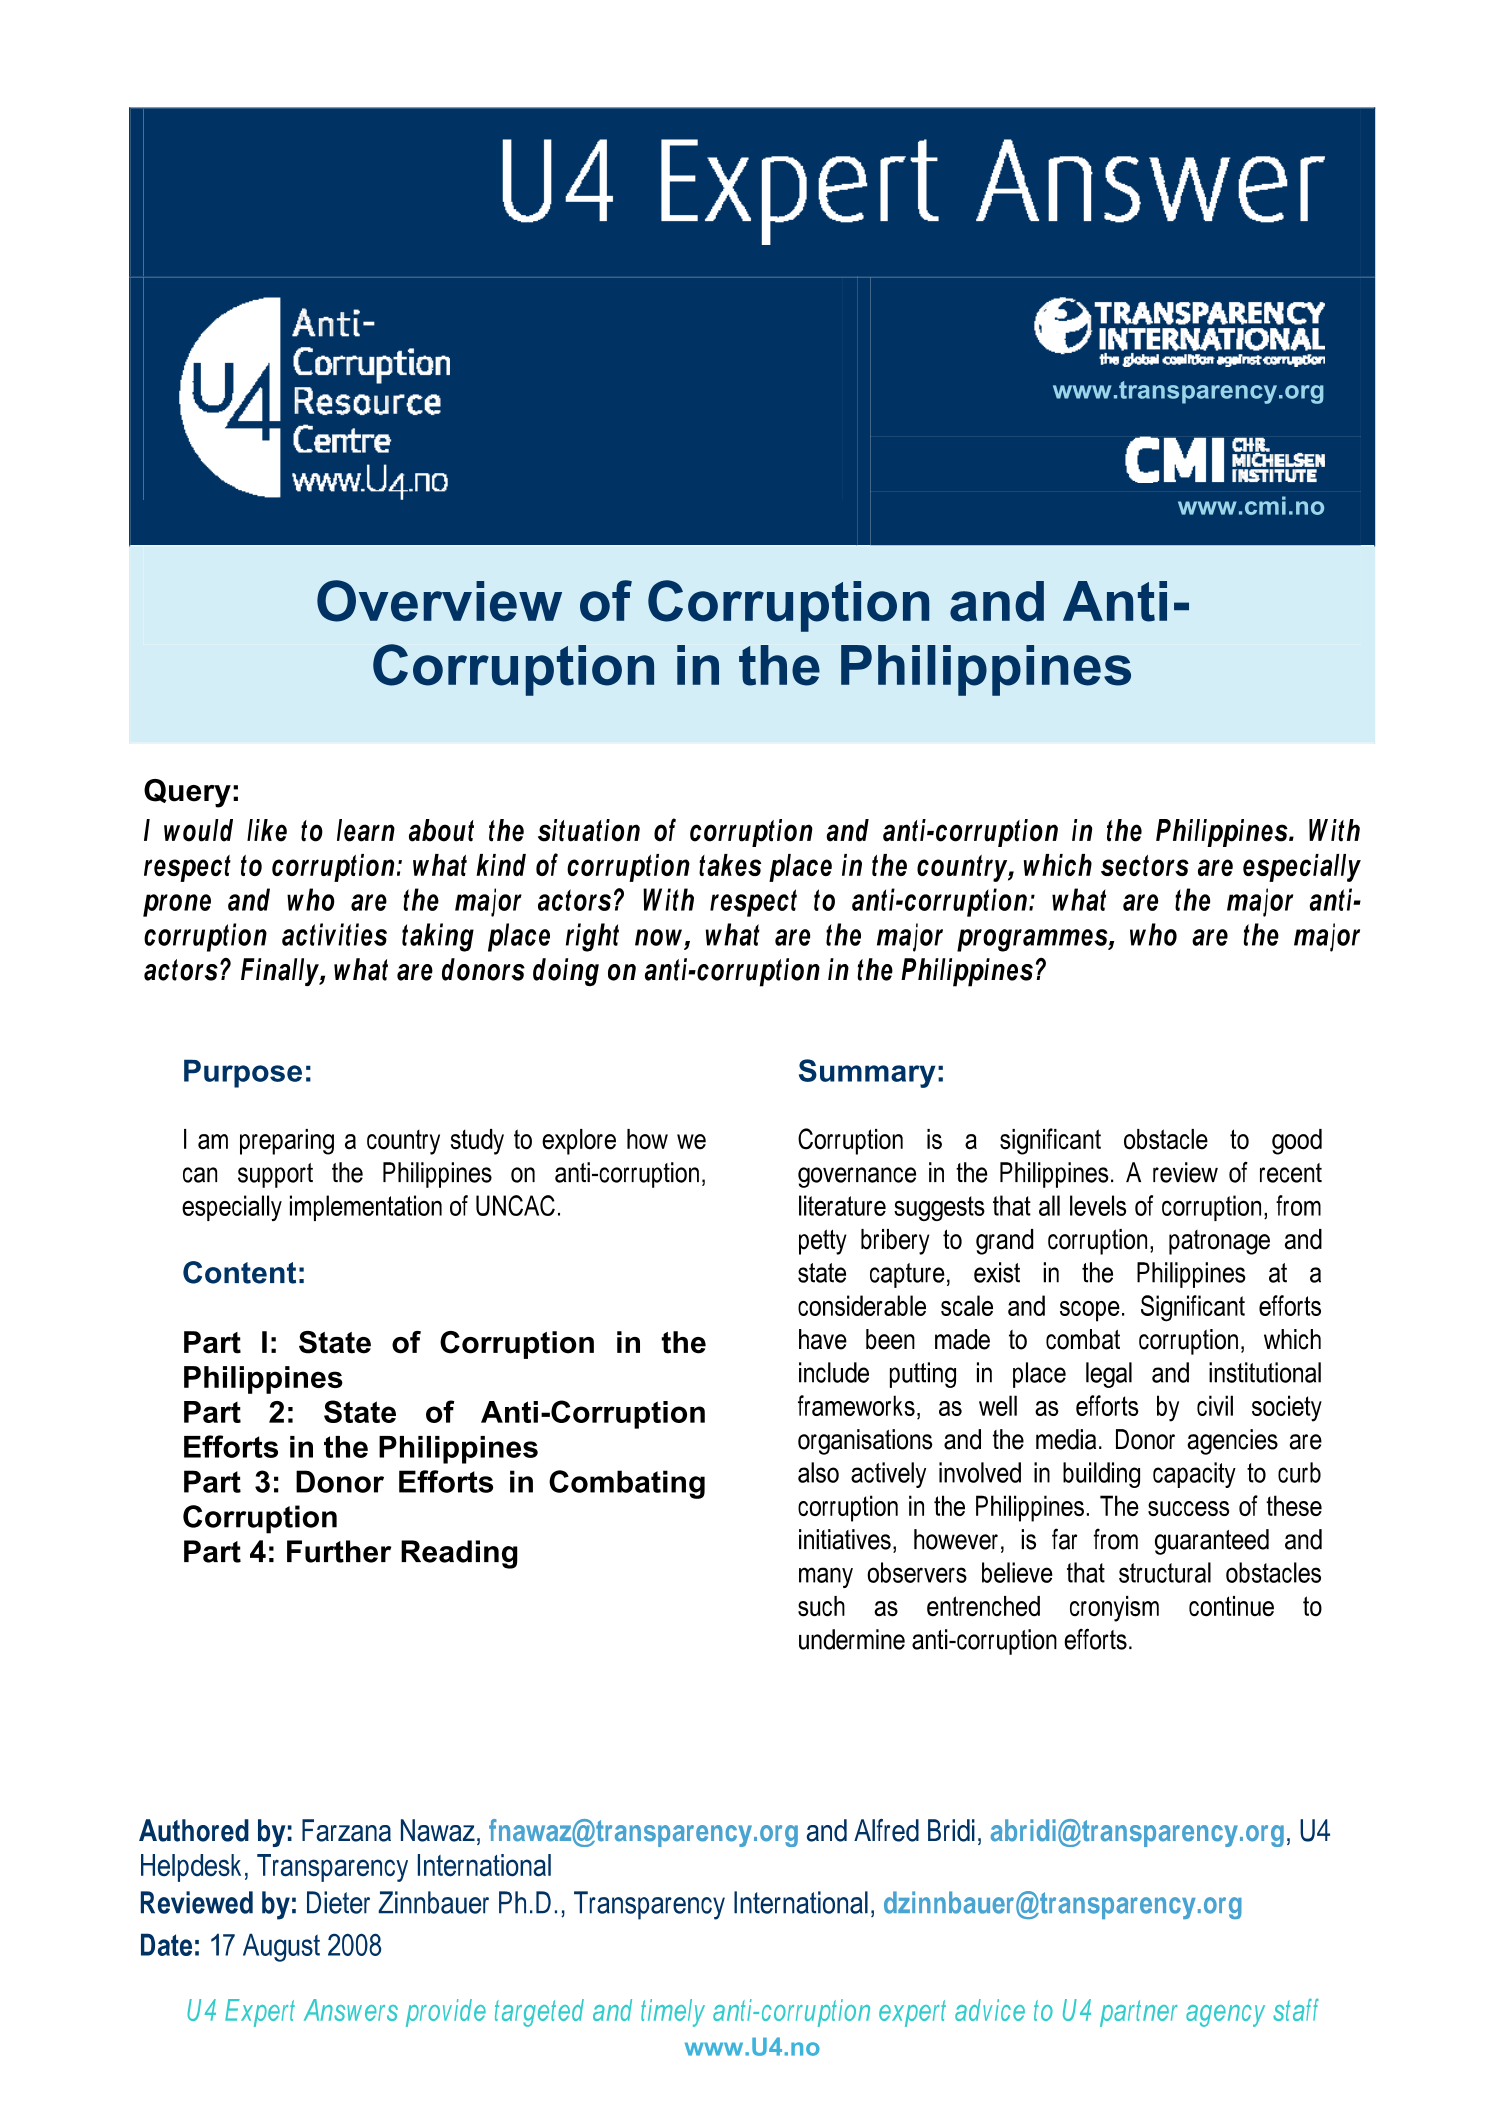 Overview of corruption and anti-corruption in the Philippines 